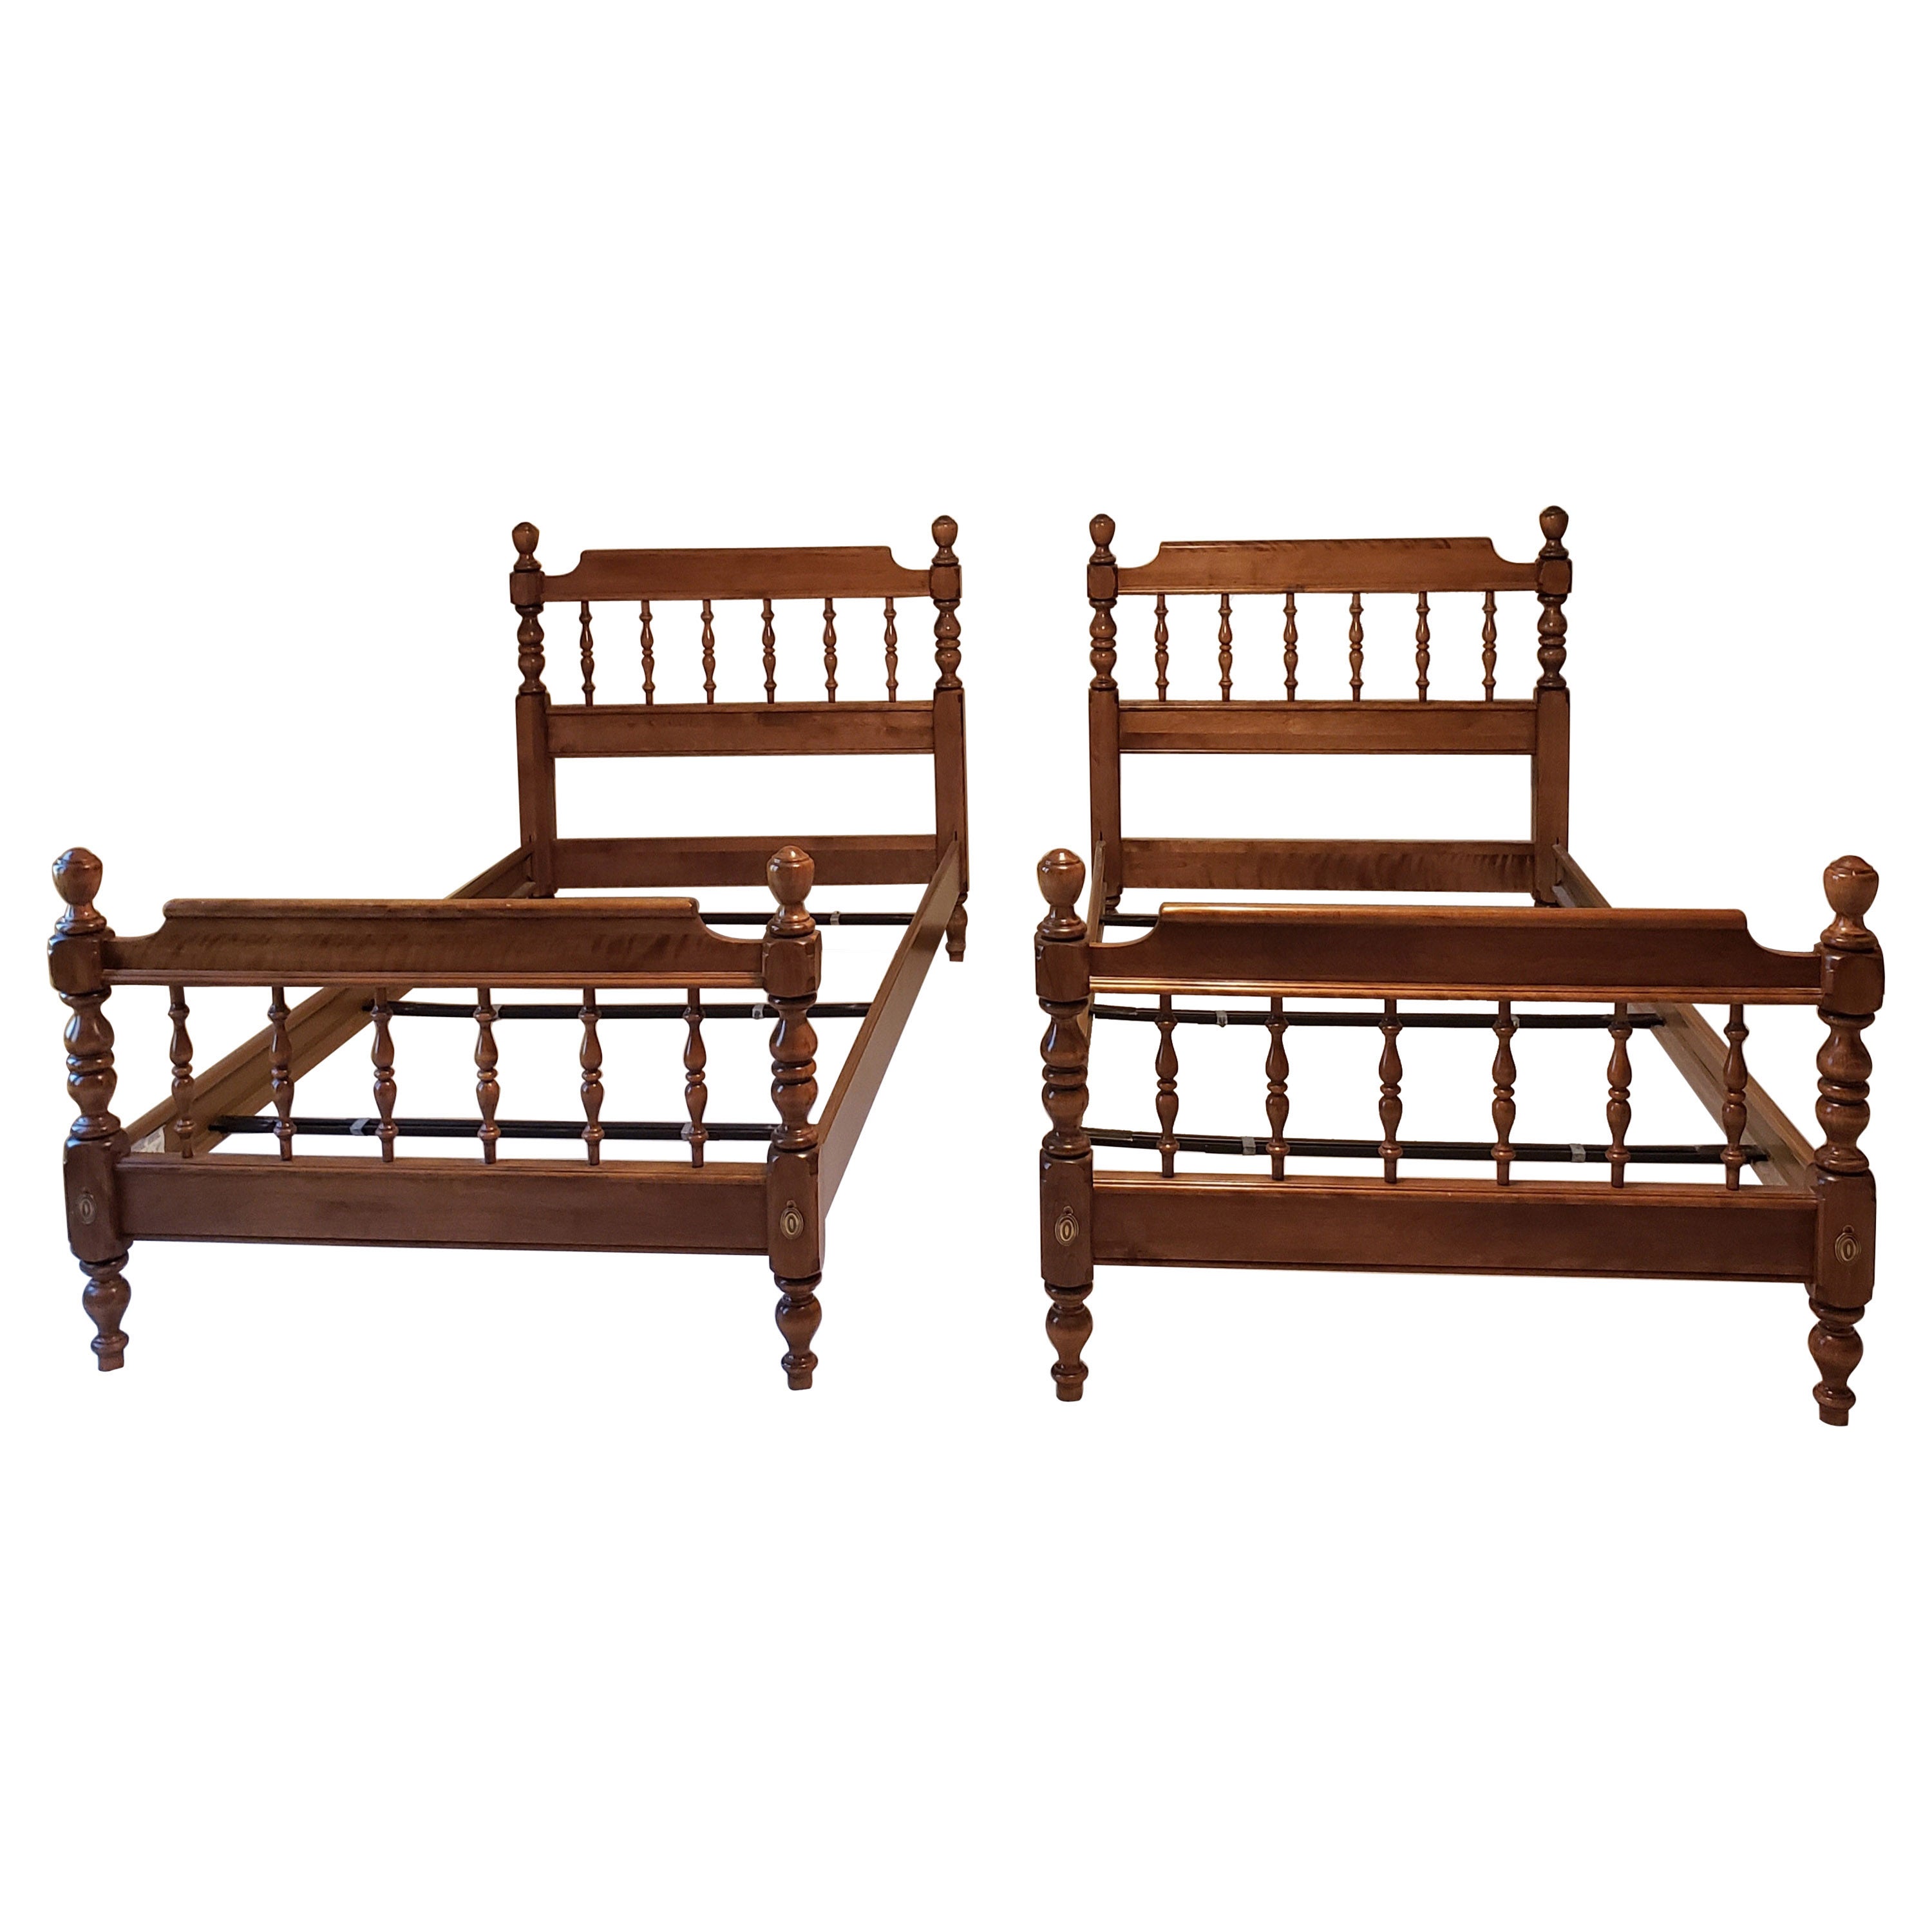 Ethan Allen Maple Spindle Twin Beds Frames, circa 1980s